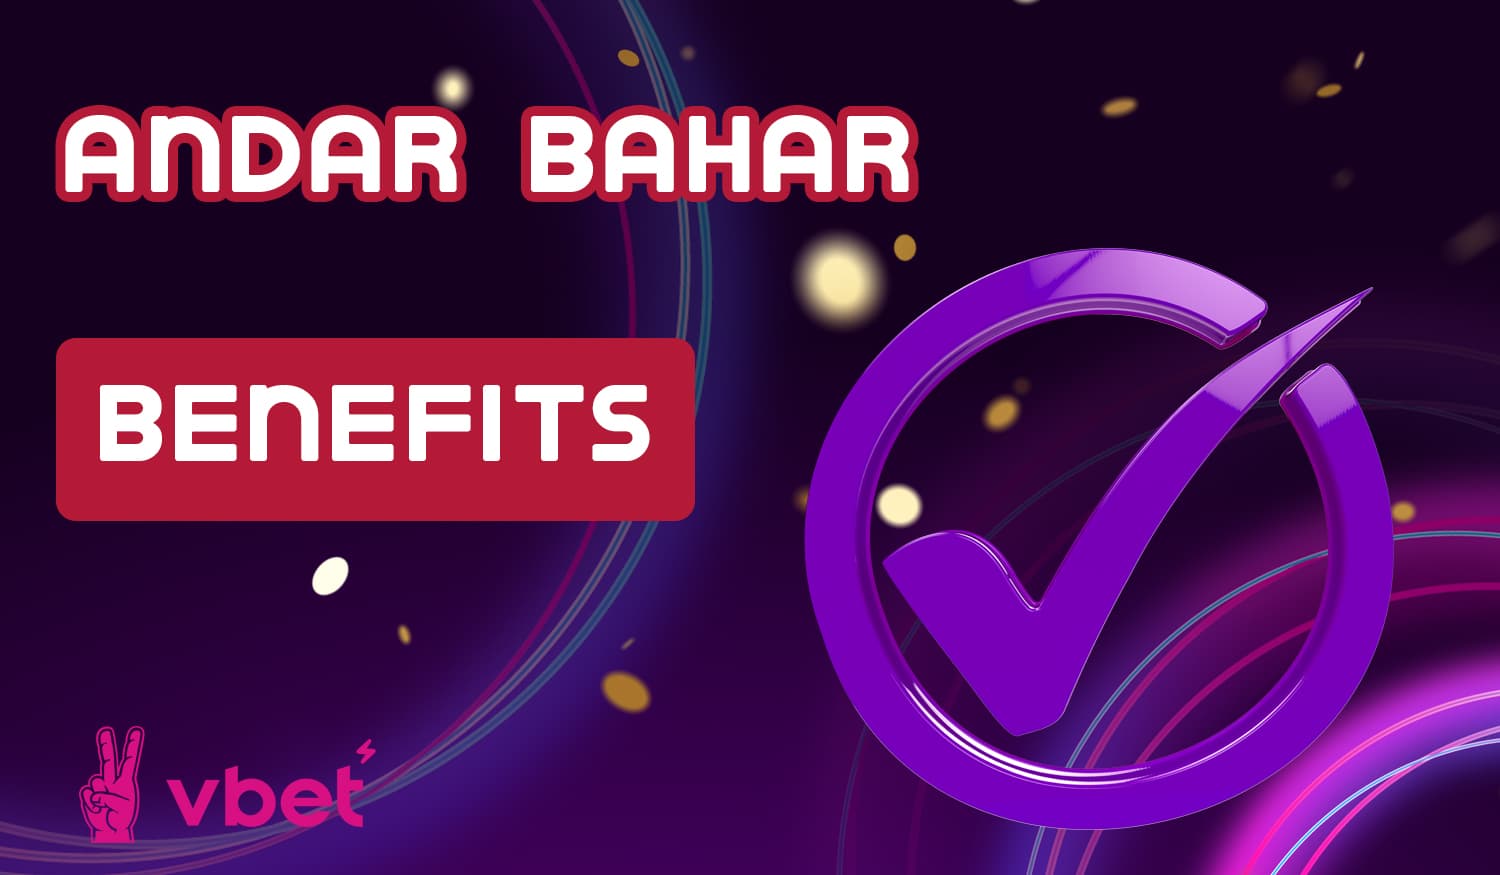 Why Vbet10 users from India should try Andar Bahar on this site